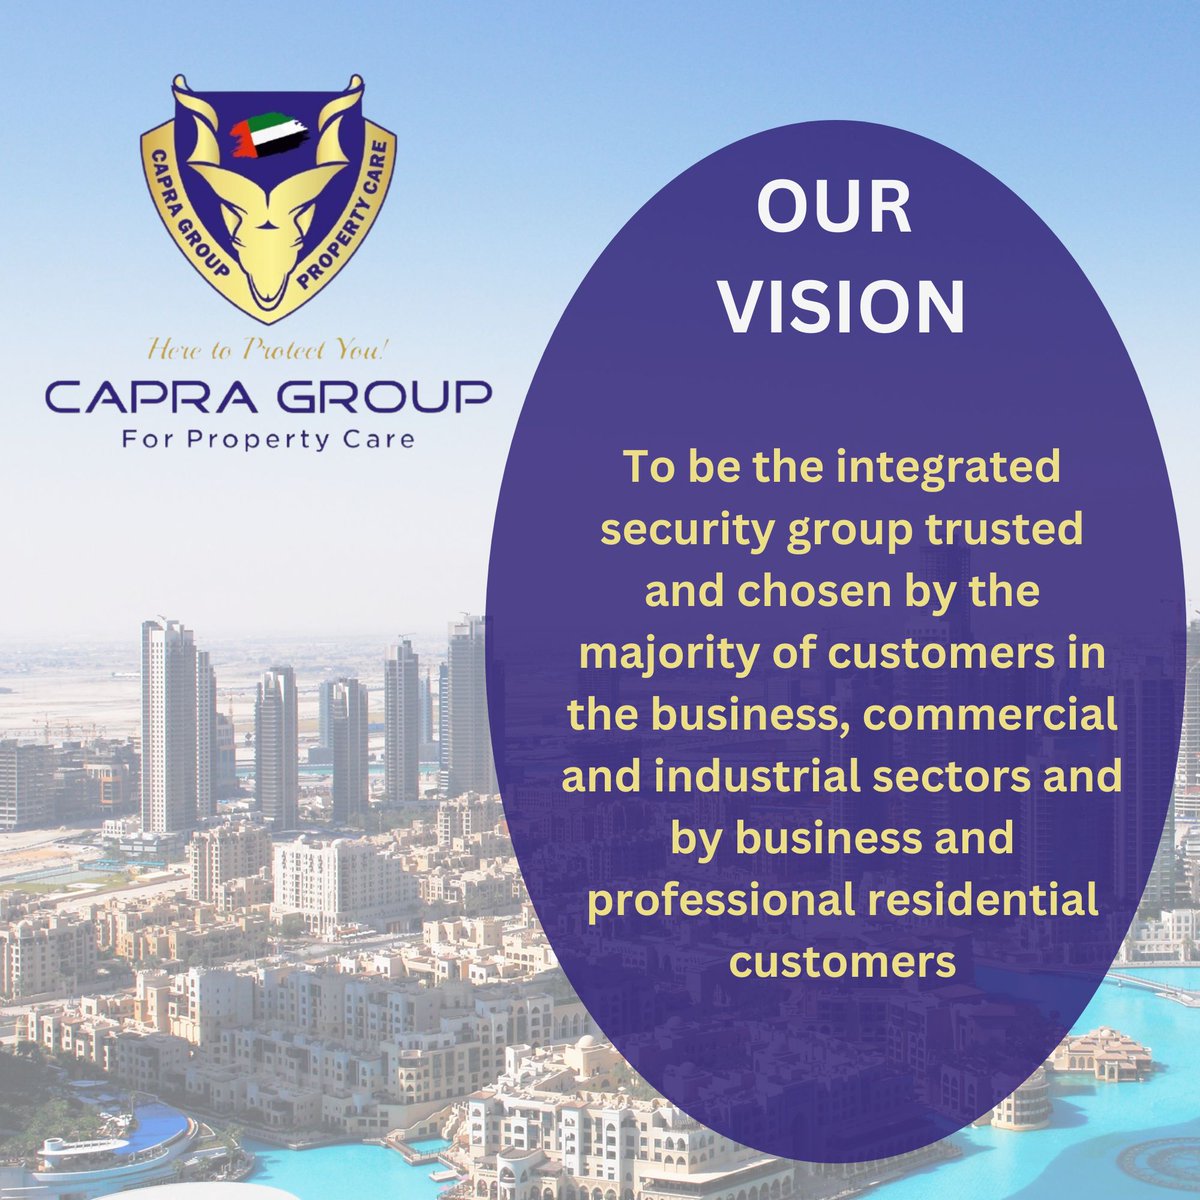 Vision can be used to provide direction and a sense of purpose.
#capragroup #securityprofessionals #heretoprotectyou #dubaisira #dubaisecurity #securityguard #business #security #safety #customerservice #costeffective #welltrained #lifeguard #dubailifeguard #capralifeguard